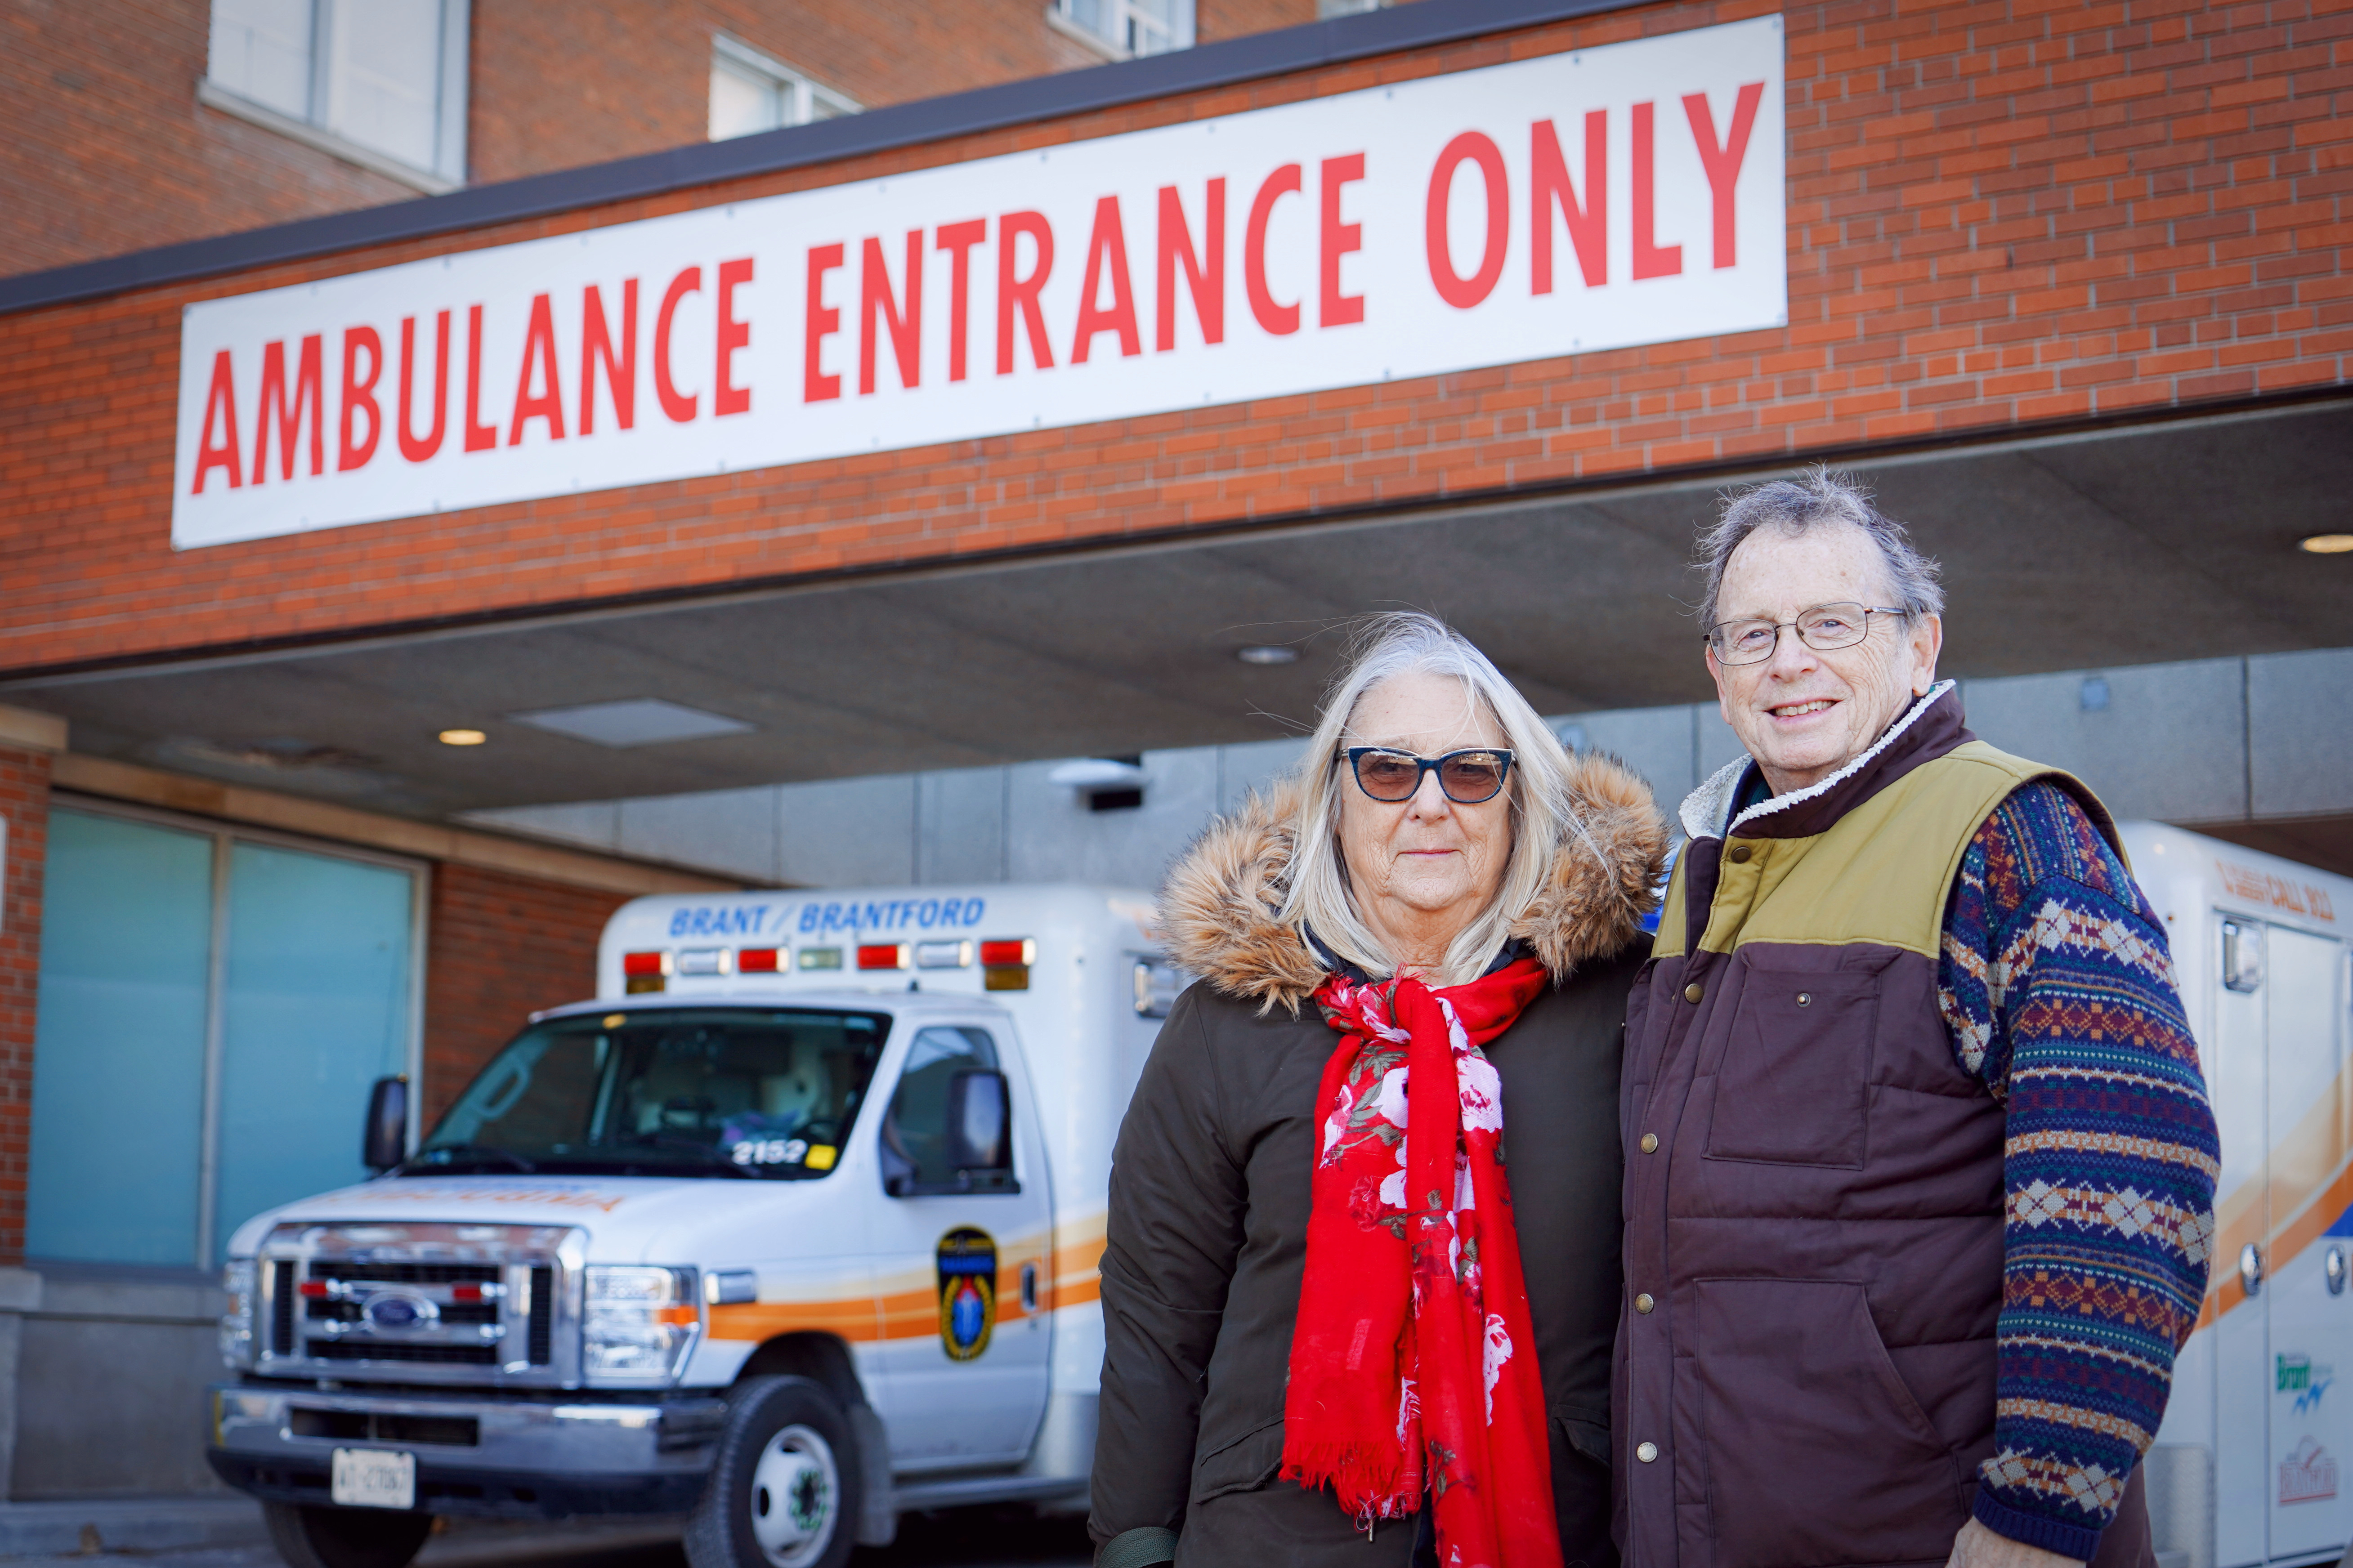 Bob Ion, who recently had a stay at Brantford General Hospital, stands outside the medical facility with his wife Jane.